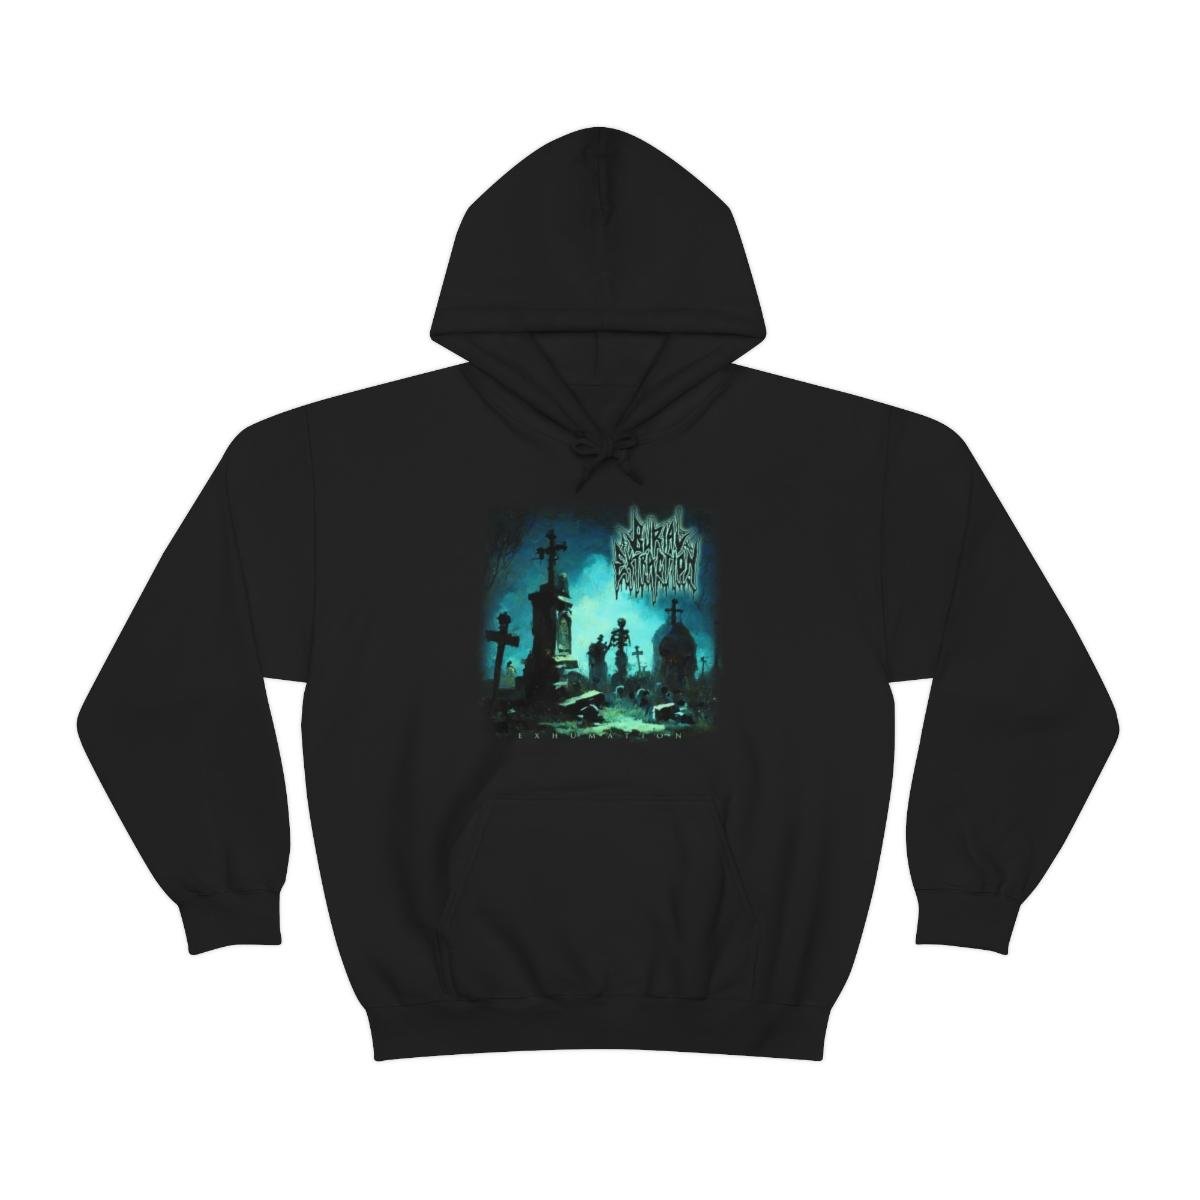 Burial Extraction – Exhumation Pullover Hooded Sweatshirt